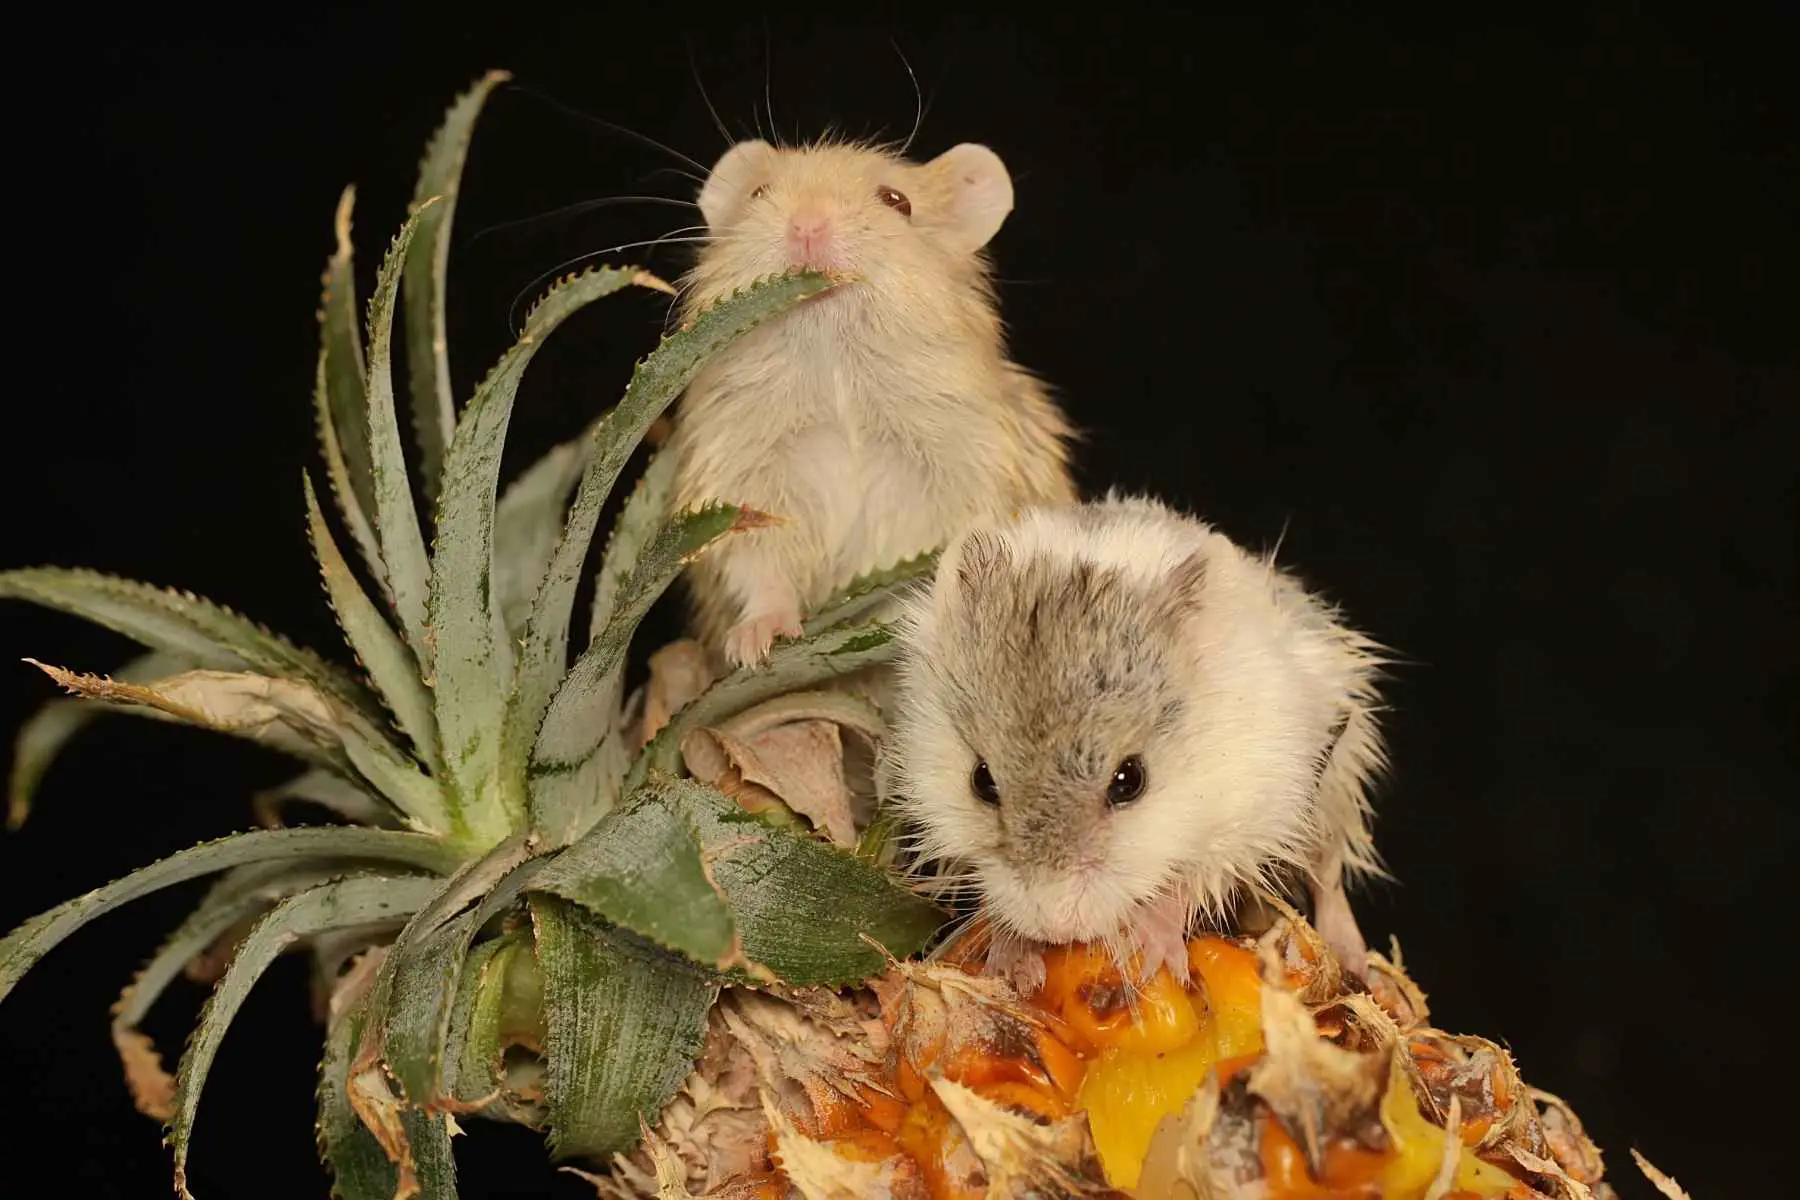 Two hamsters sitting on a pineapple